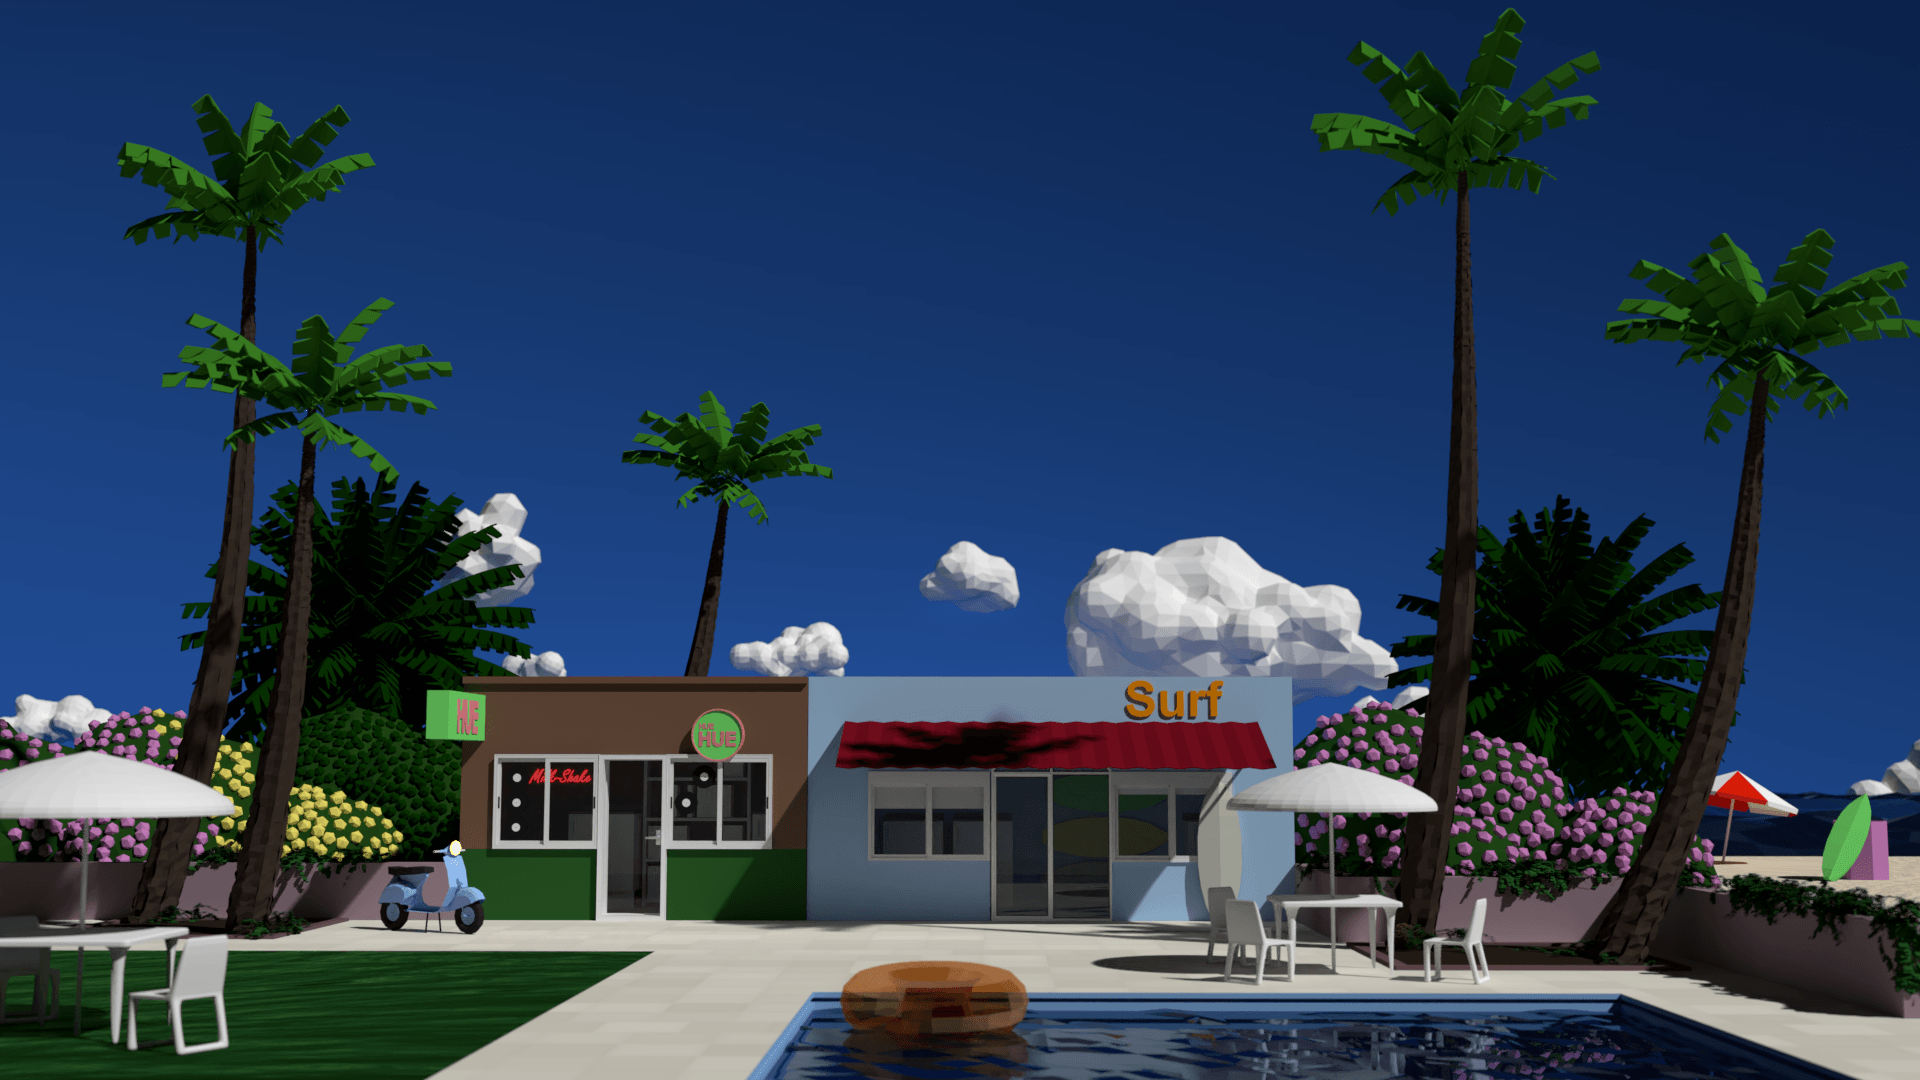 Low poly scene inspired by one of Hiroshi Nagai's works had to